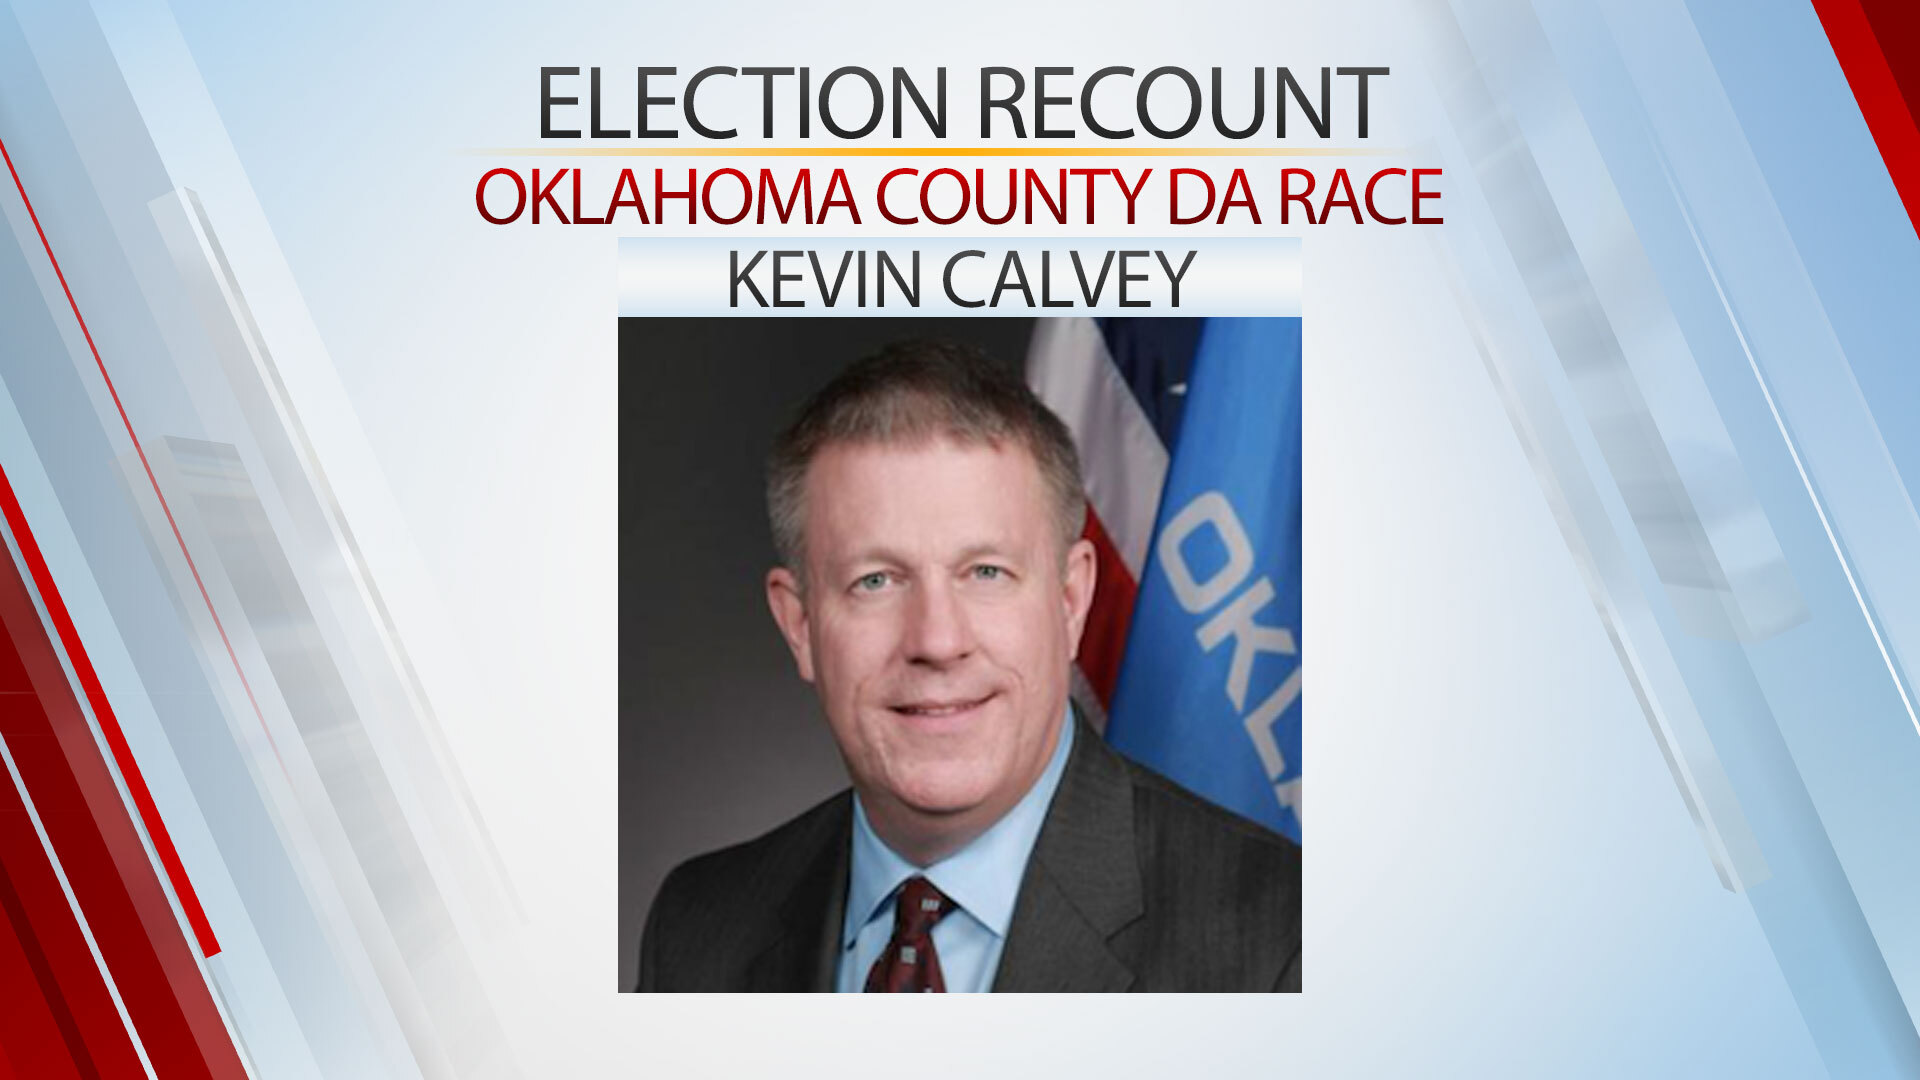 Election Board To Hold Recount In Oklahoma County DA Race